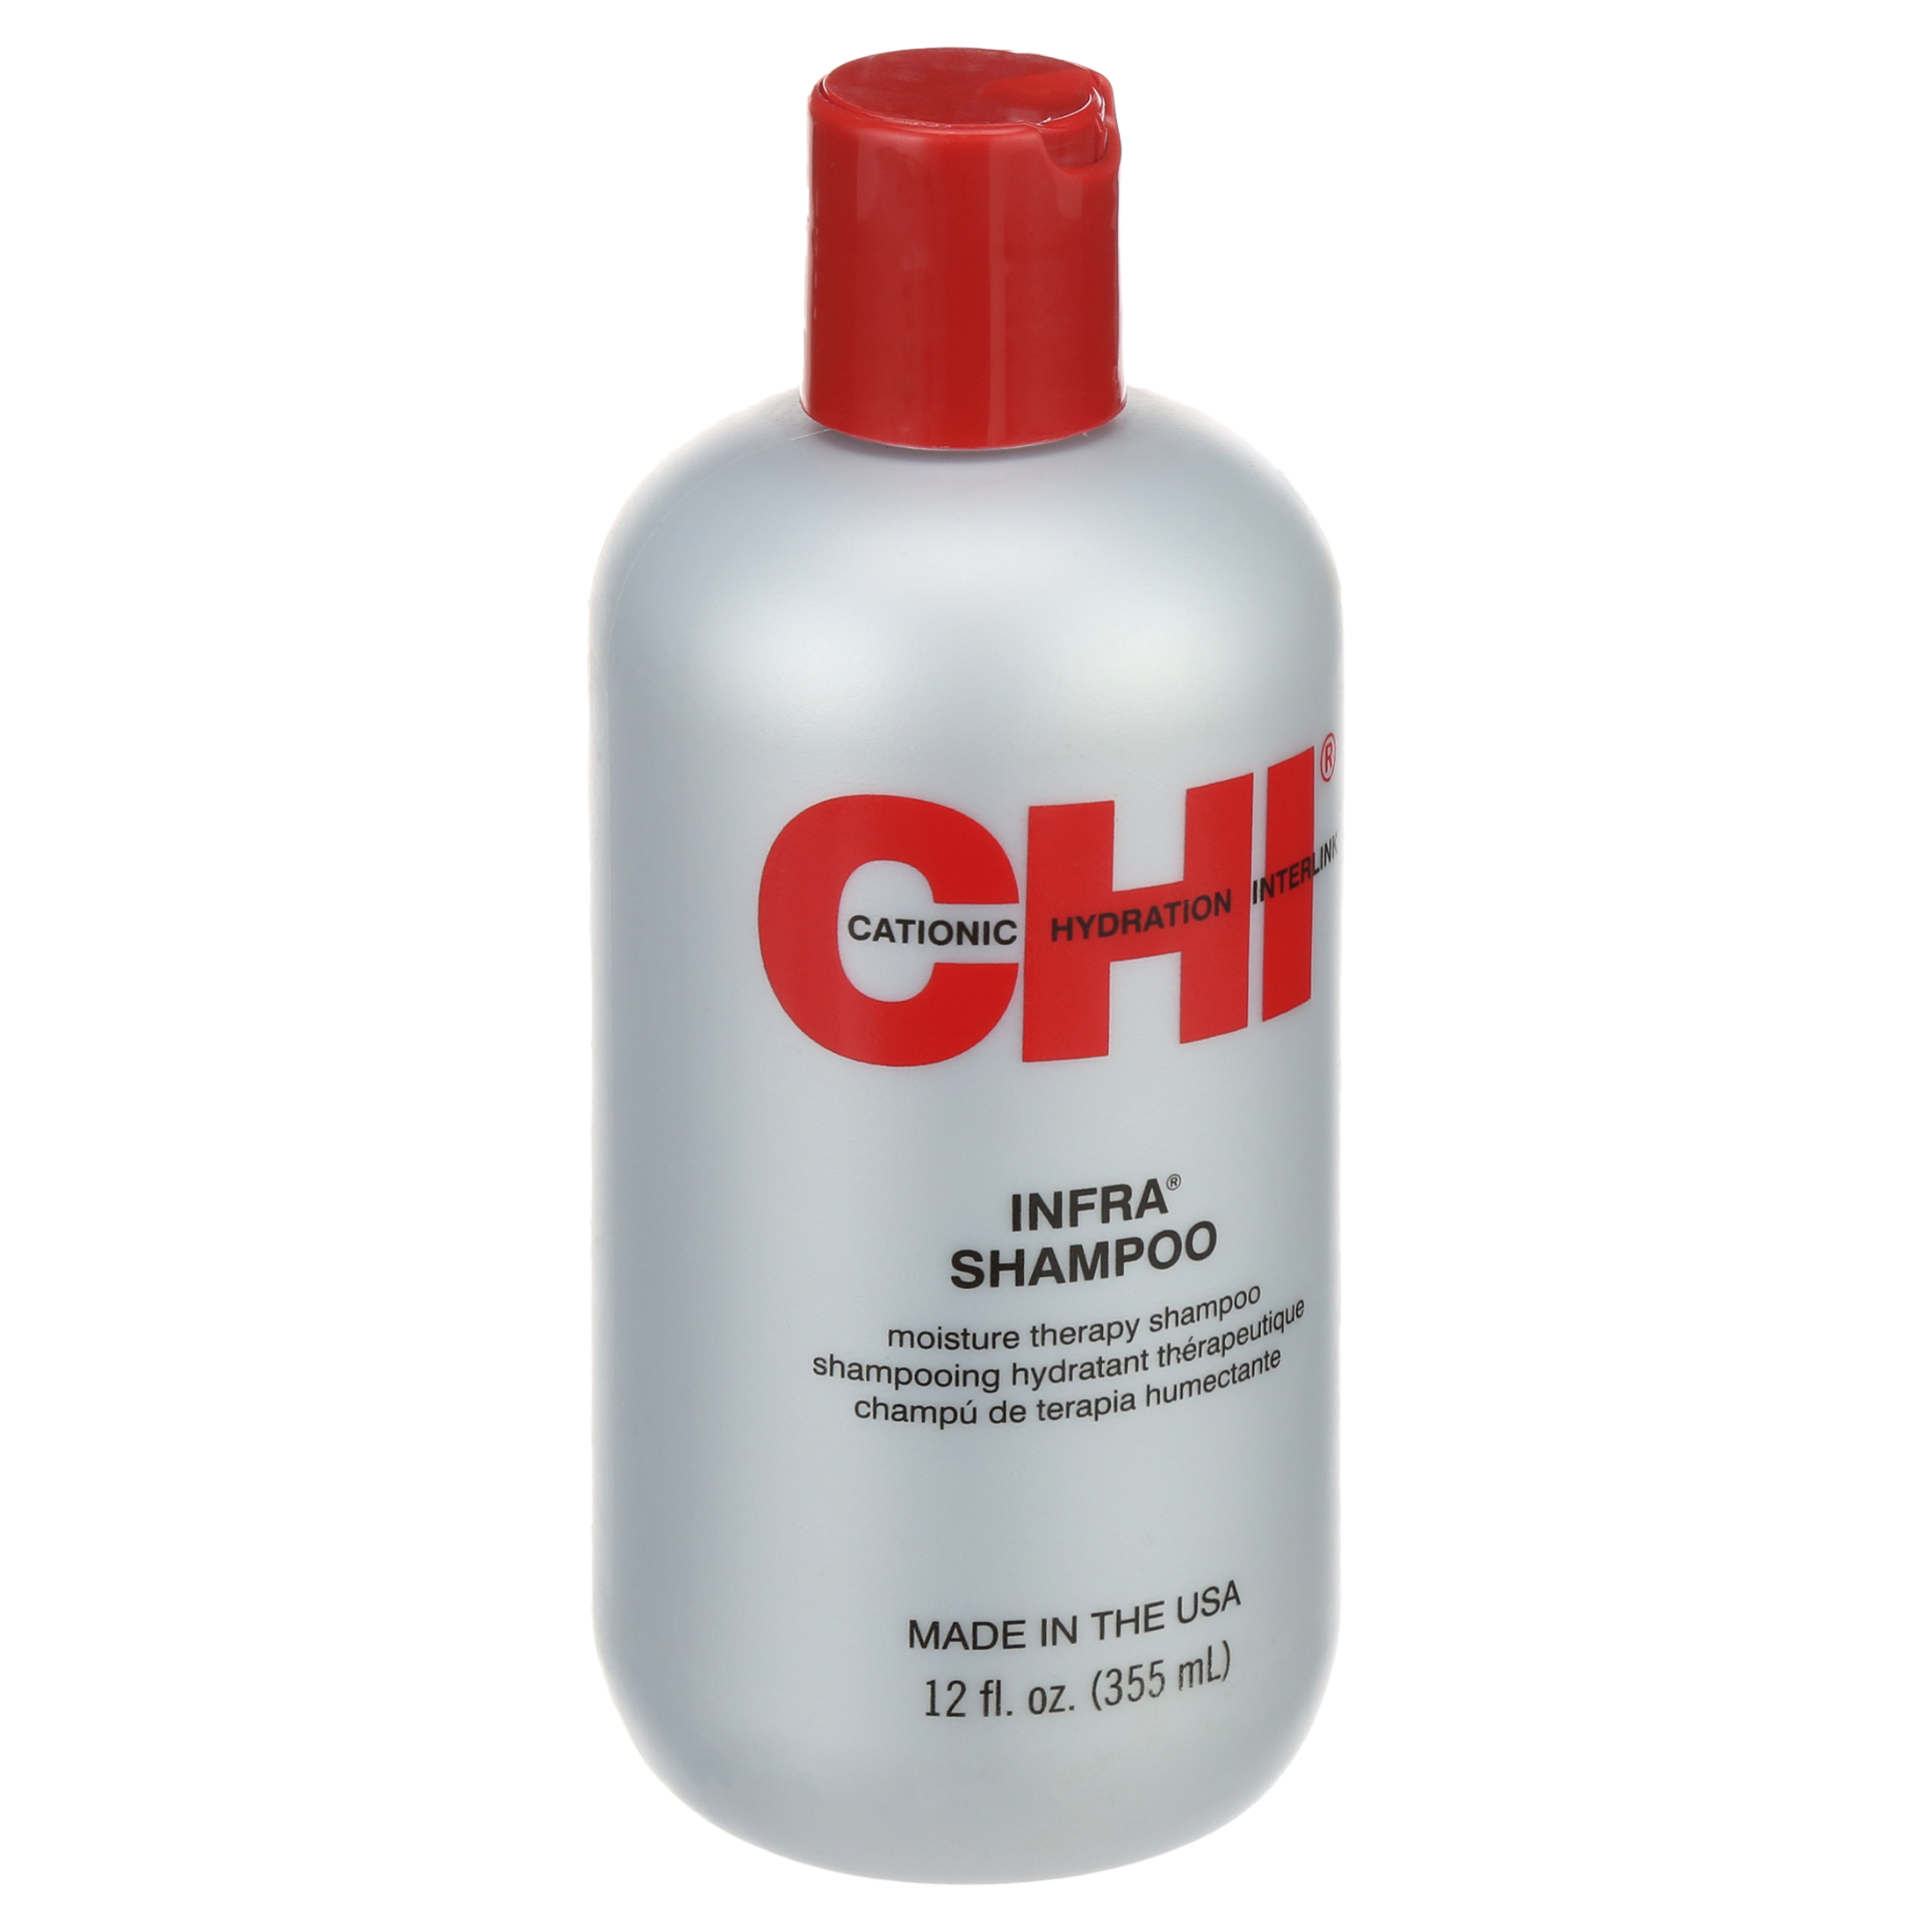 CHI Infra Moisture Therapy Shampoo 12 oz - image 5 of 7